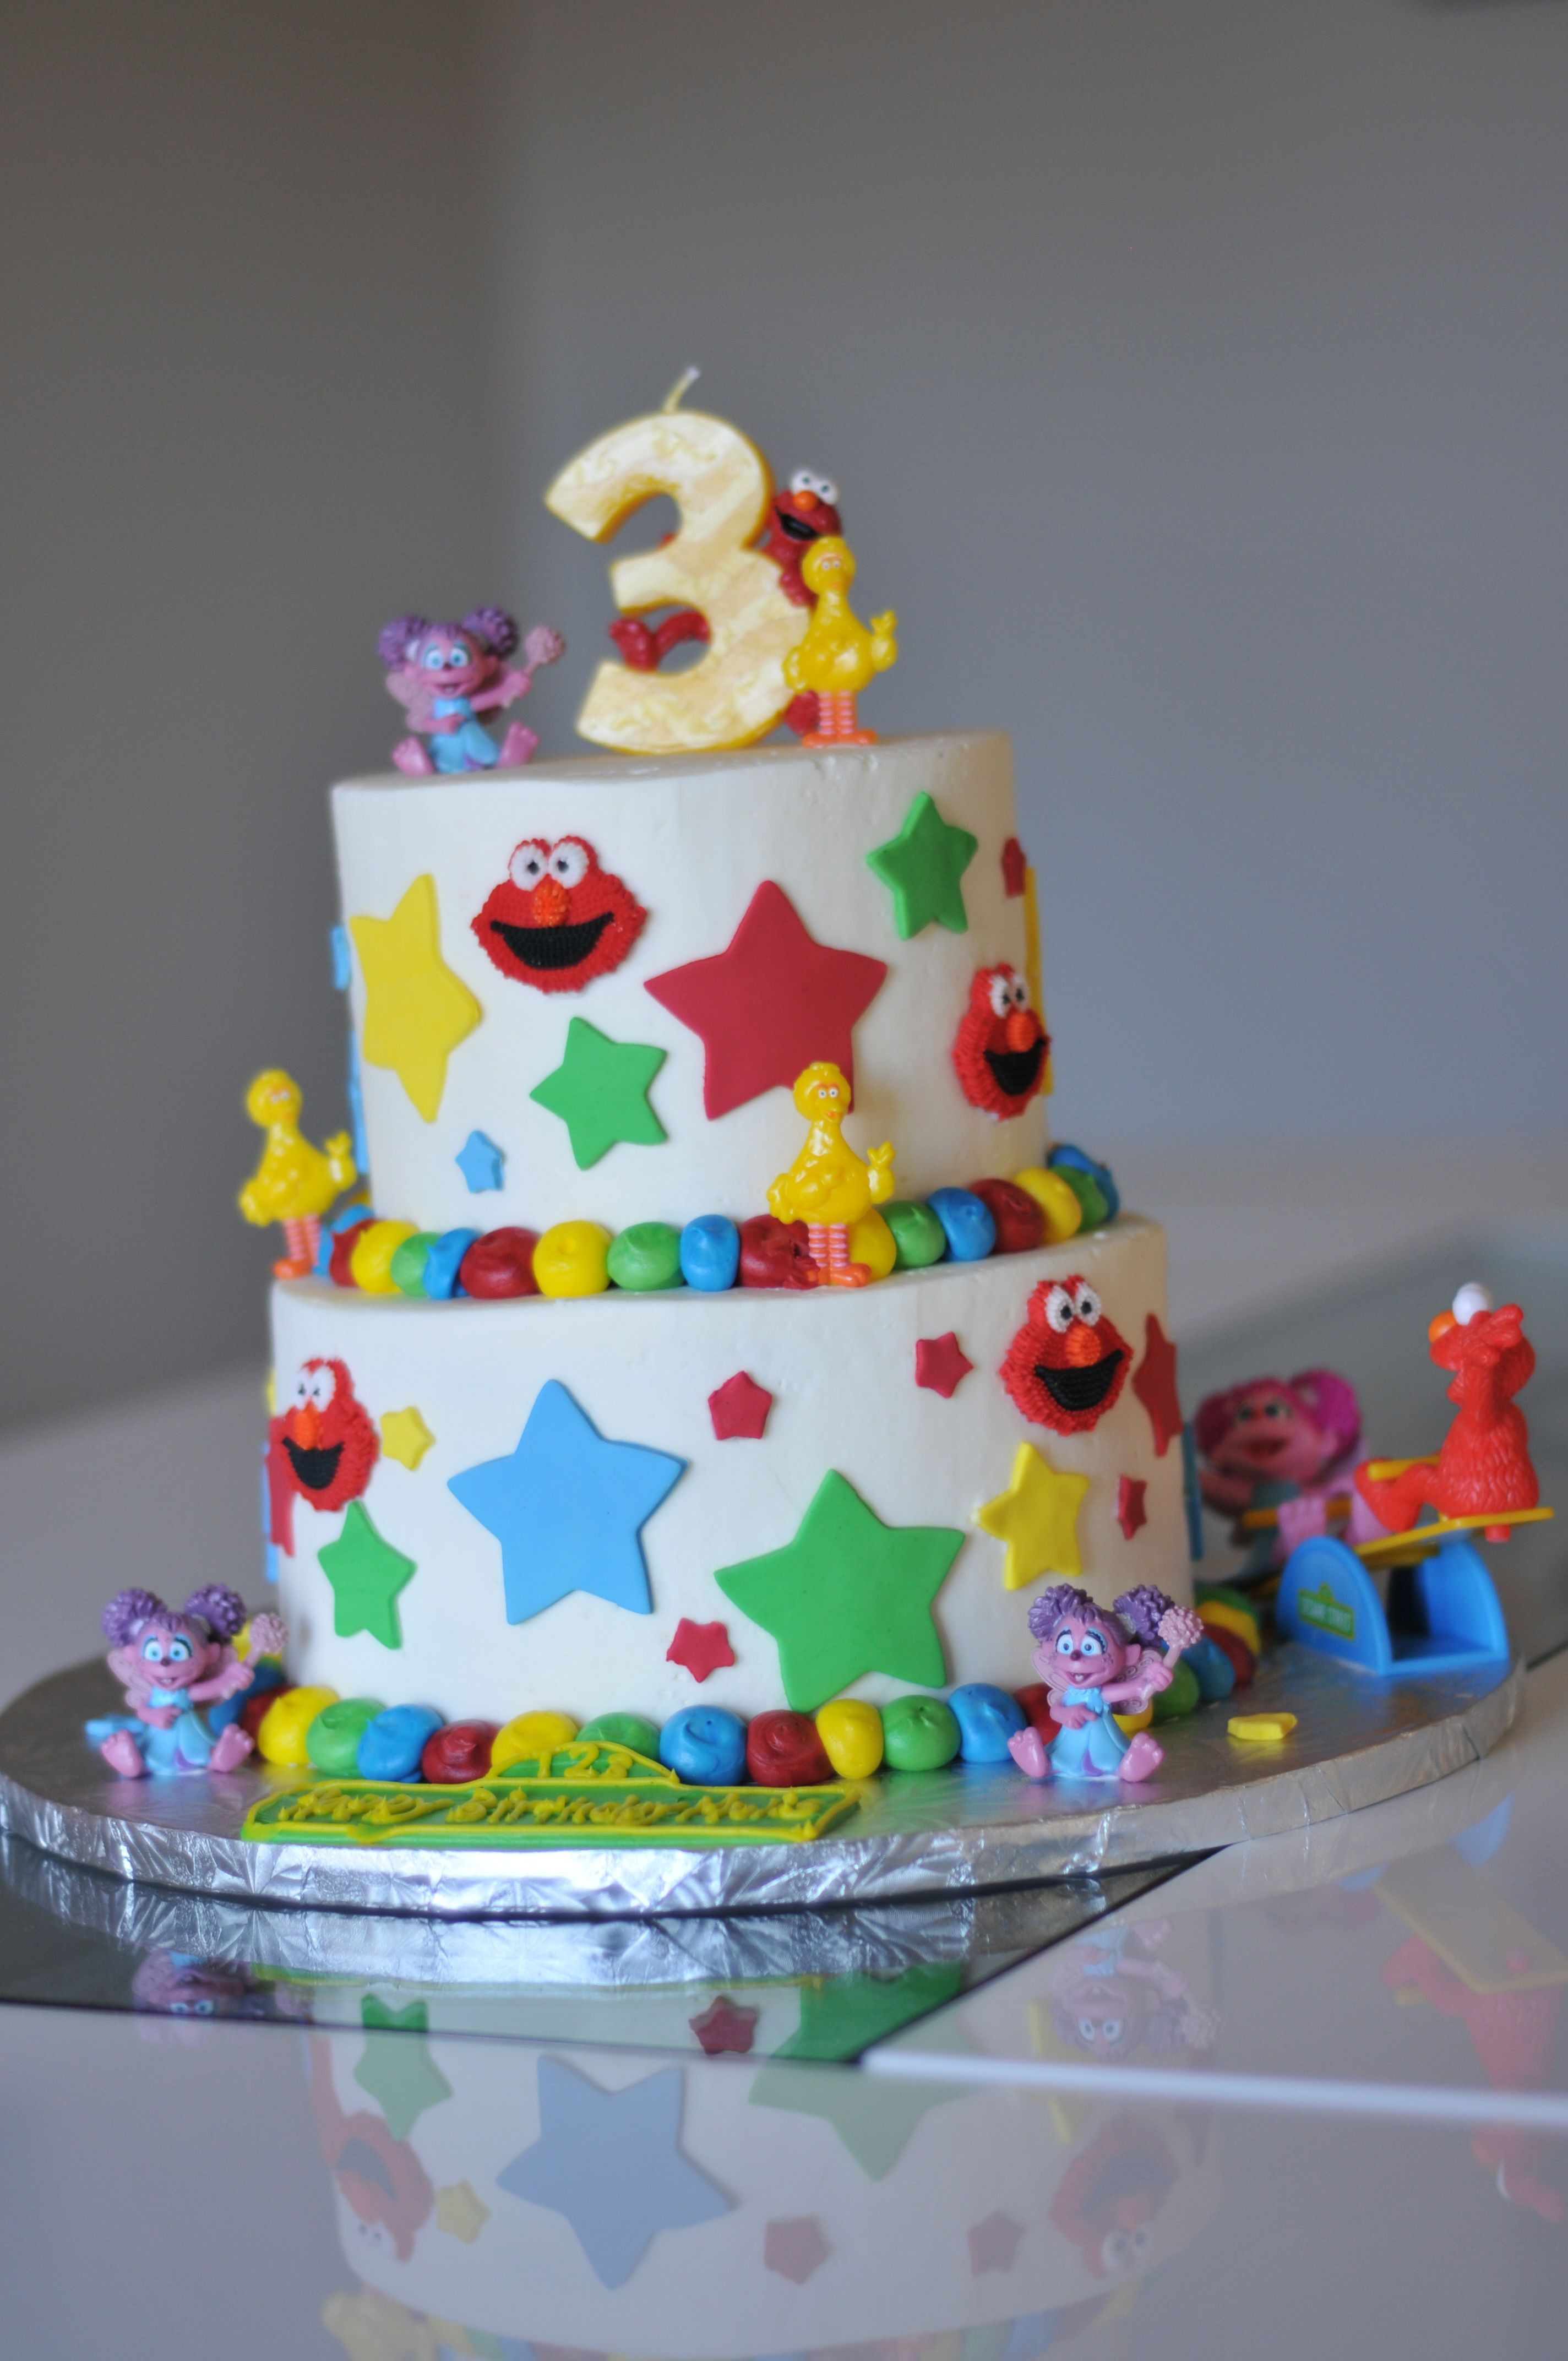 Birthday Party Ideas For 3 Year Old Boy
 Very Cool Birthday Cake for a 3 year old girl